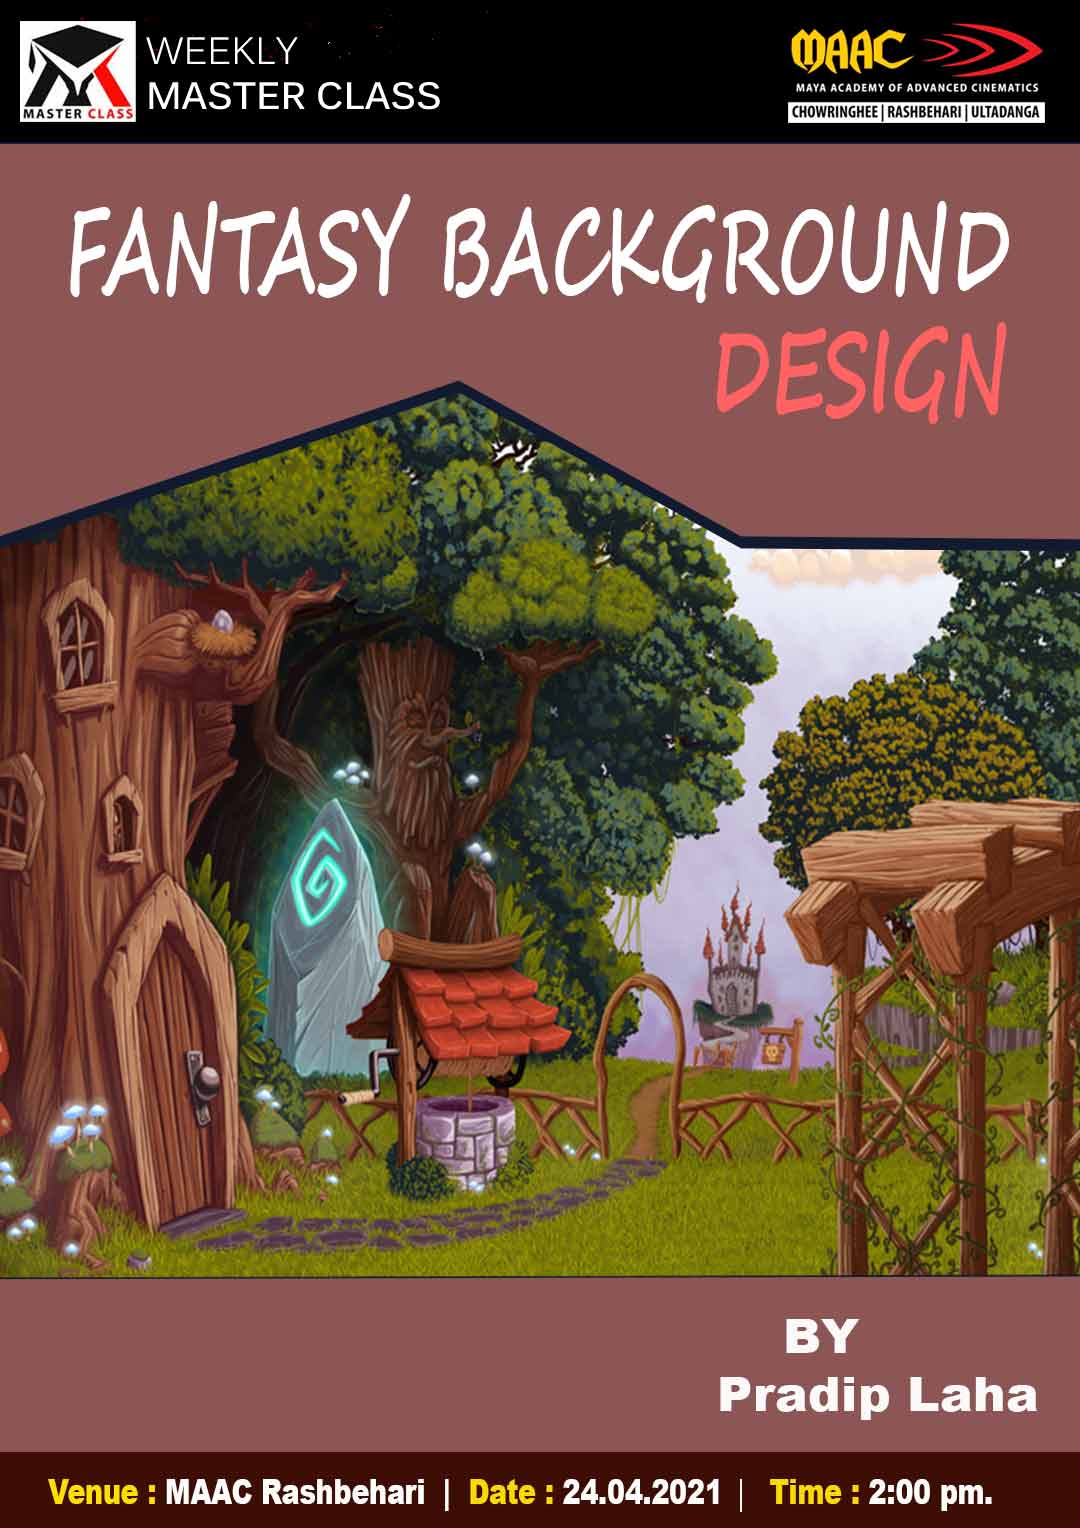 Weekly Master Class on Fantasy Background Design